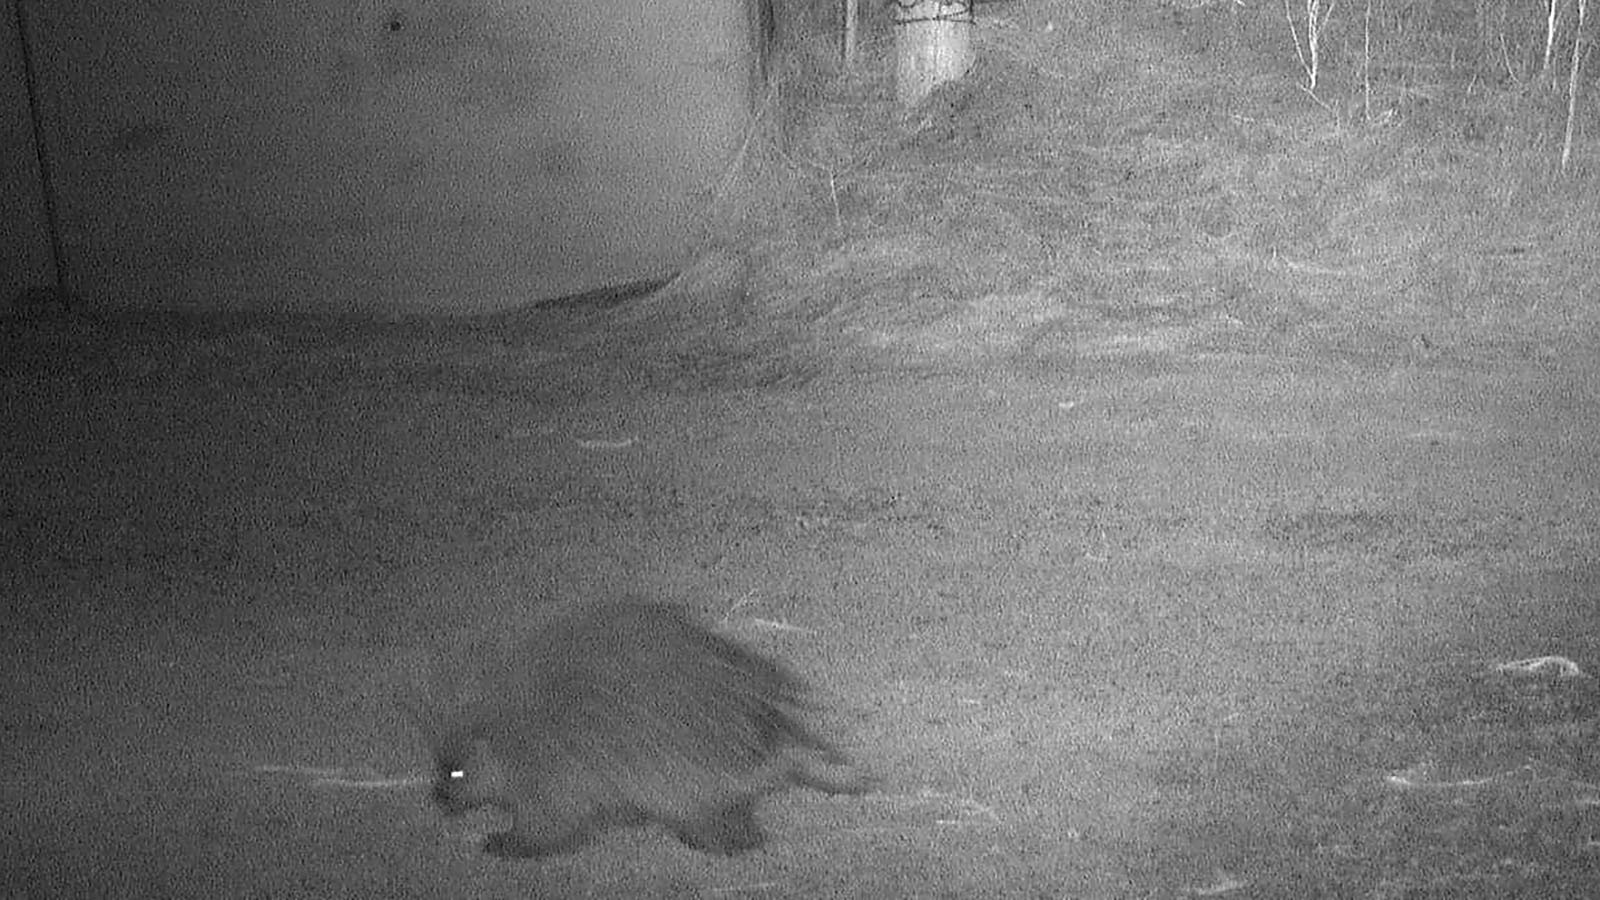 Along with big game animals, smaller critters like this porcupine have taken advantage of wildlife underpasses along Highway 189 between La Barge and Big Piney.